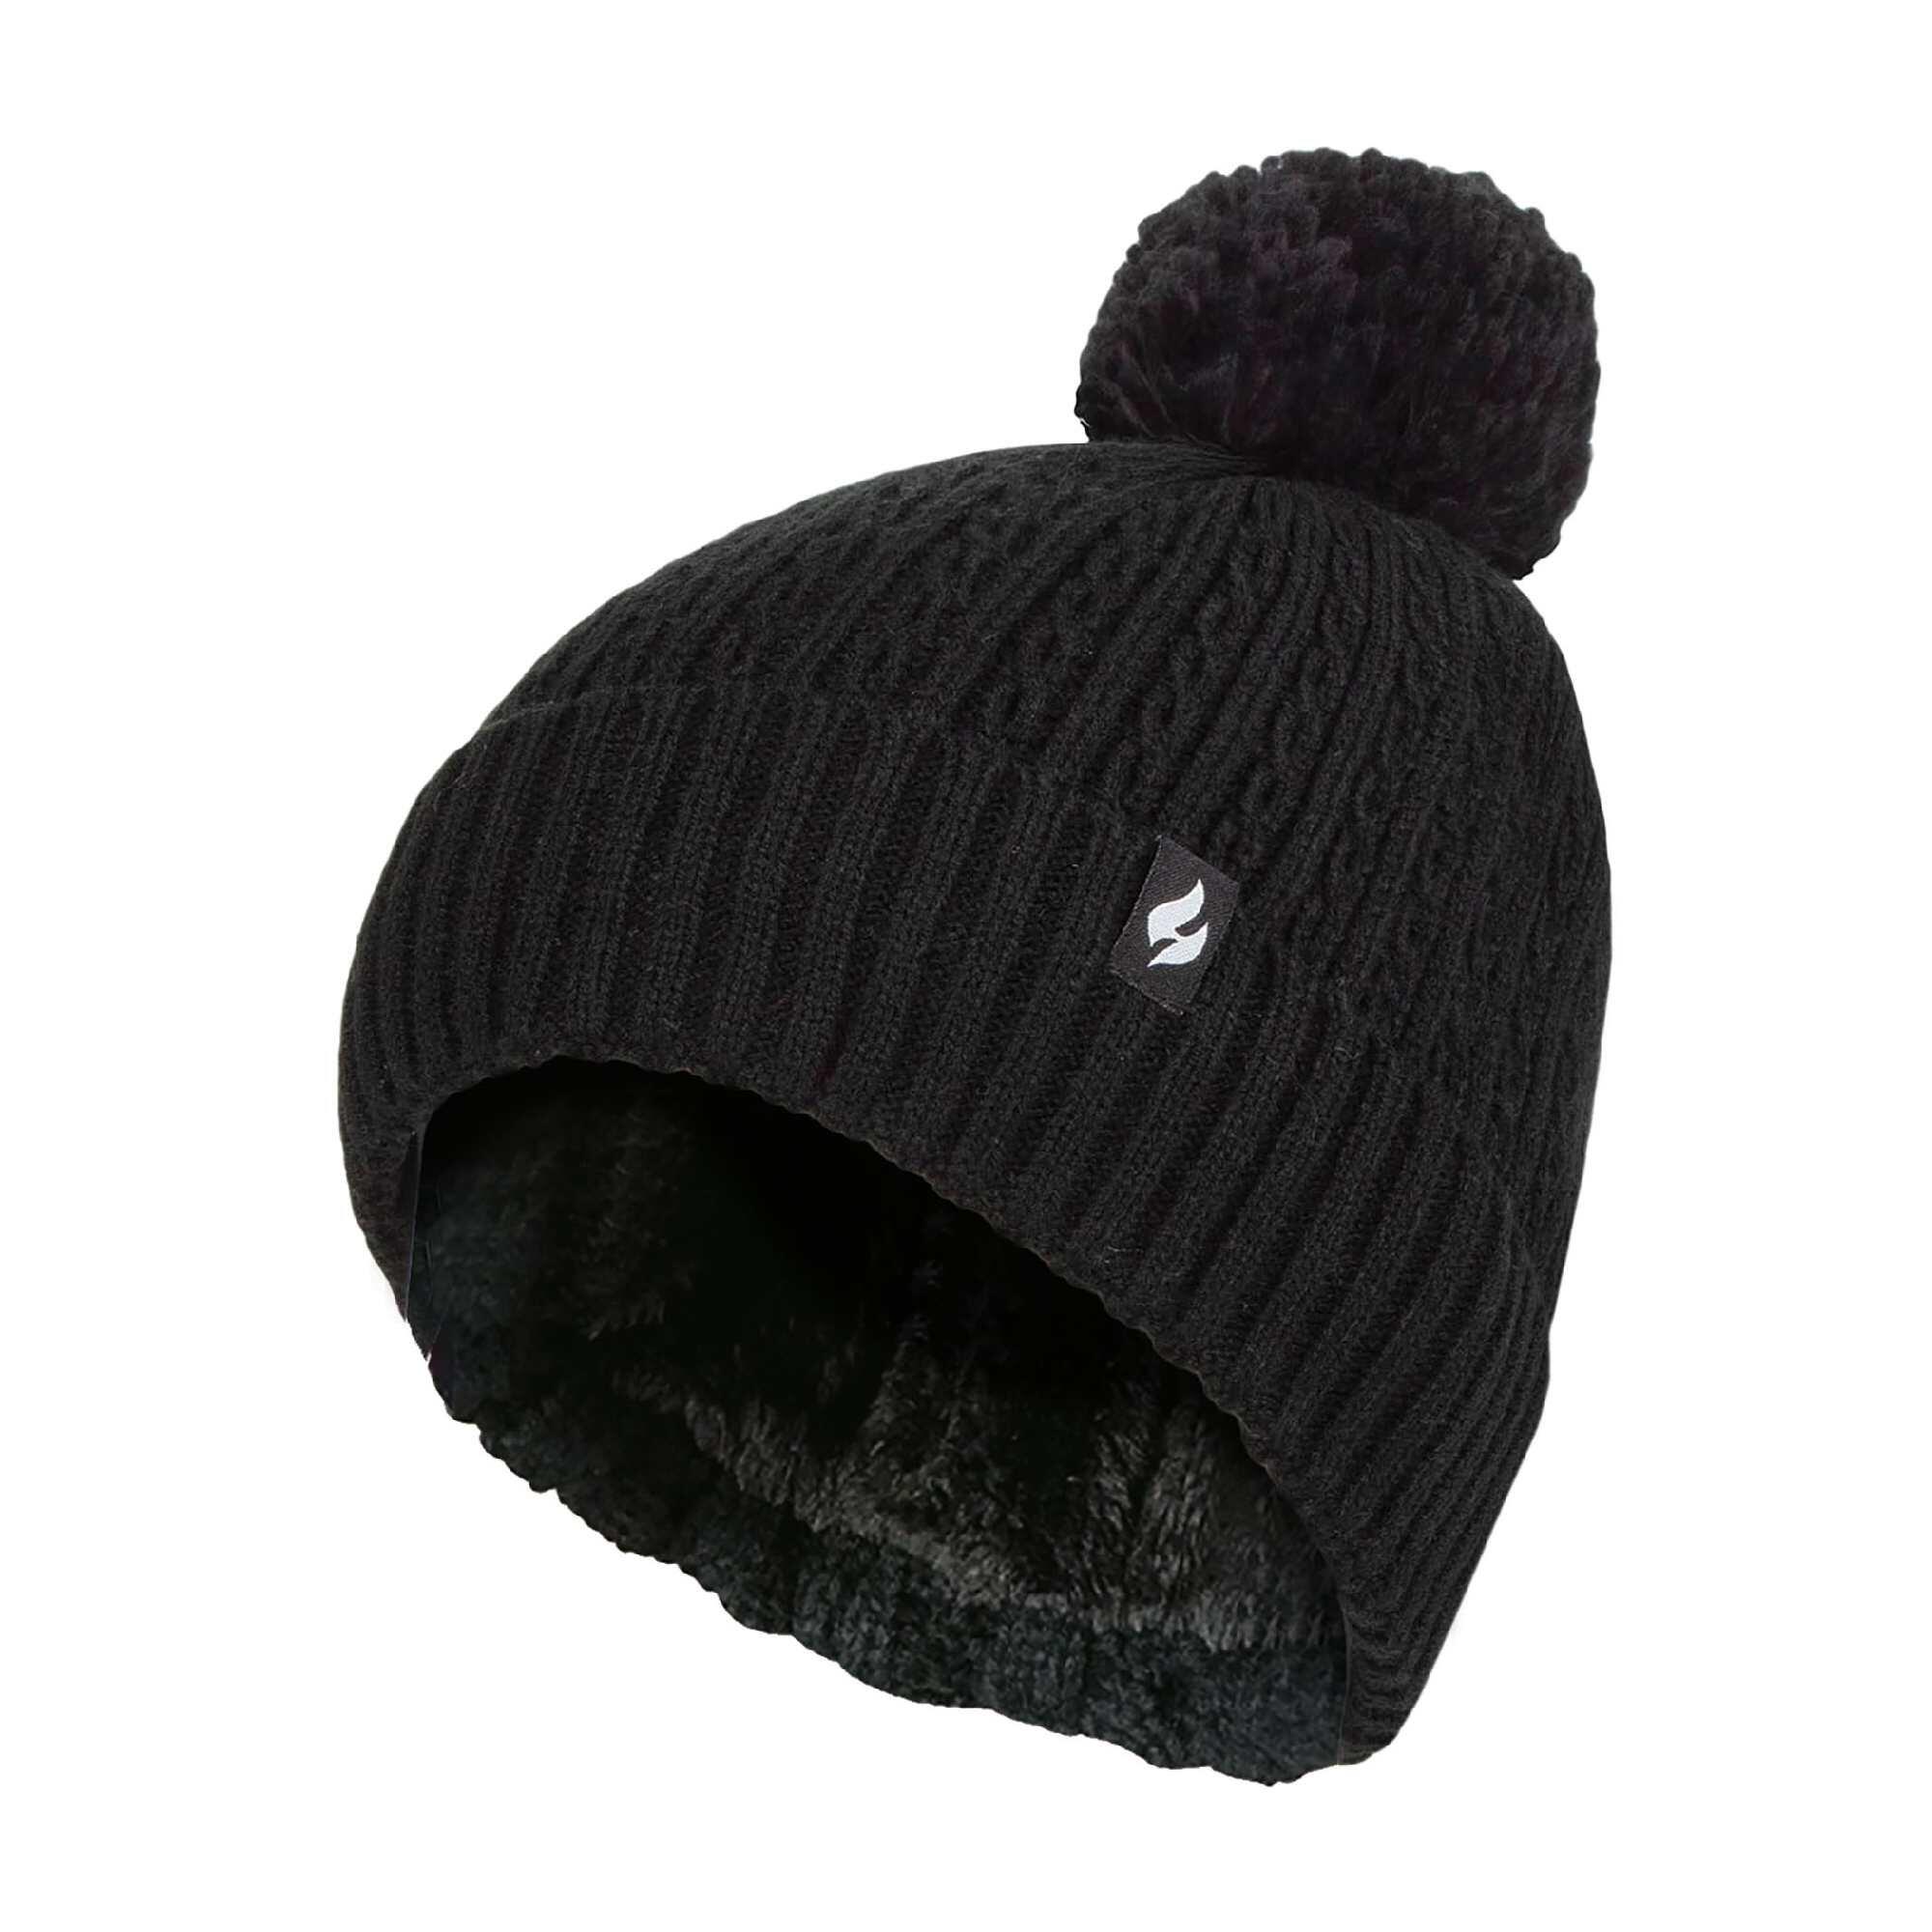 HEAT HOLDERS Ladies Winter Knitted Ribbed Thermal Cable Beanie Pom Pom Hat